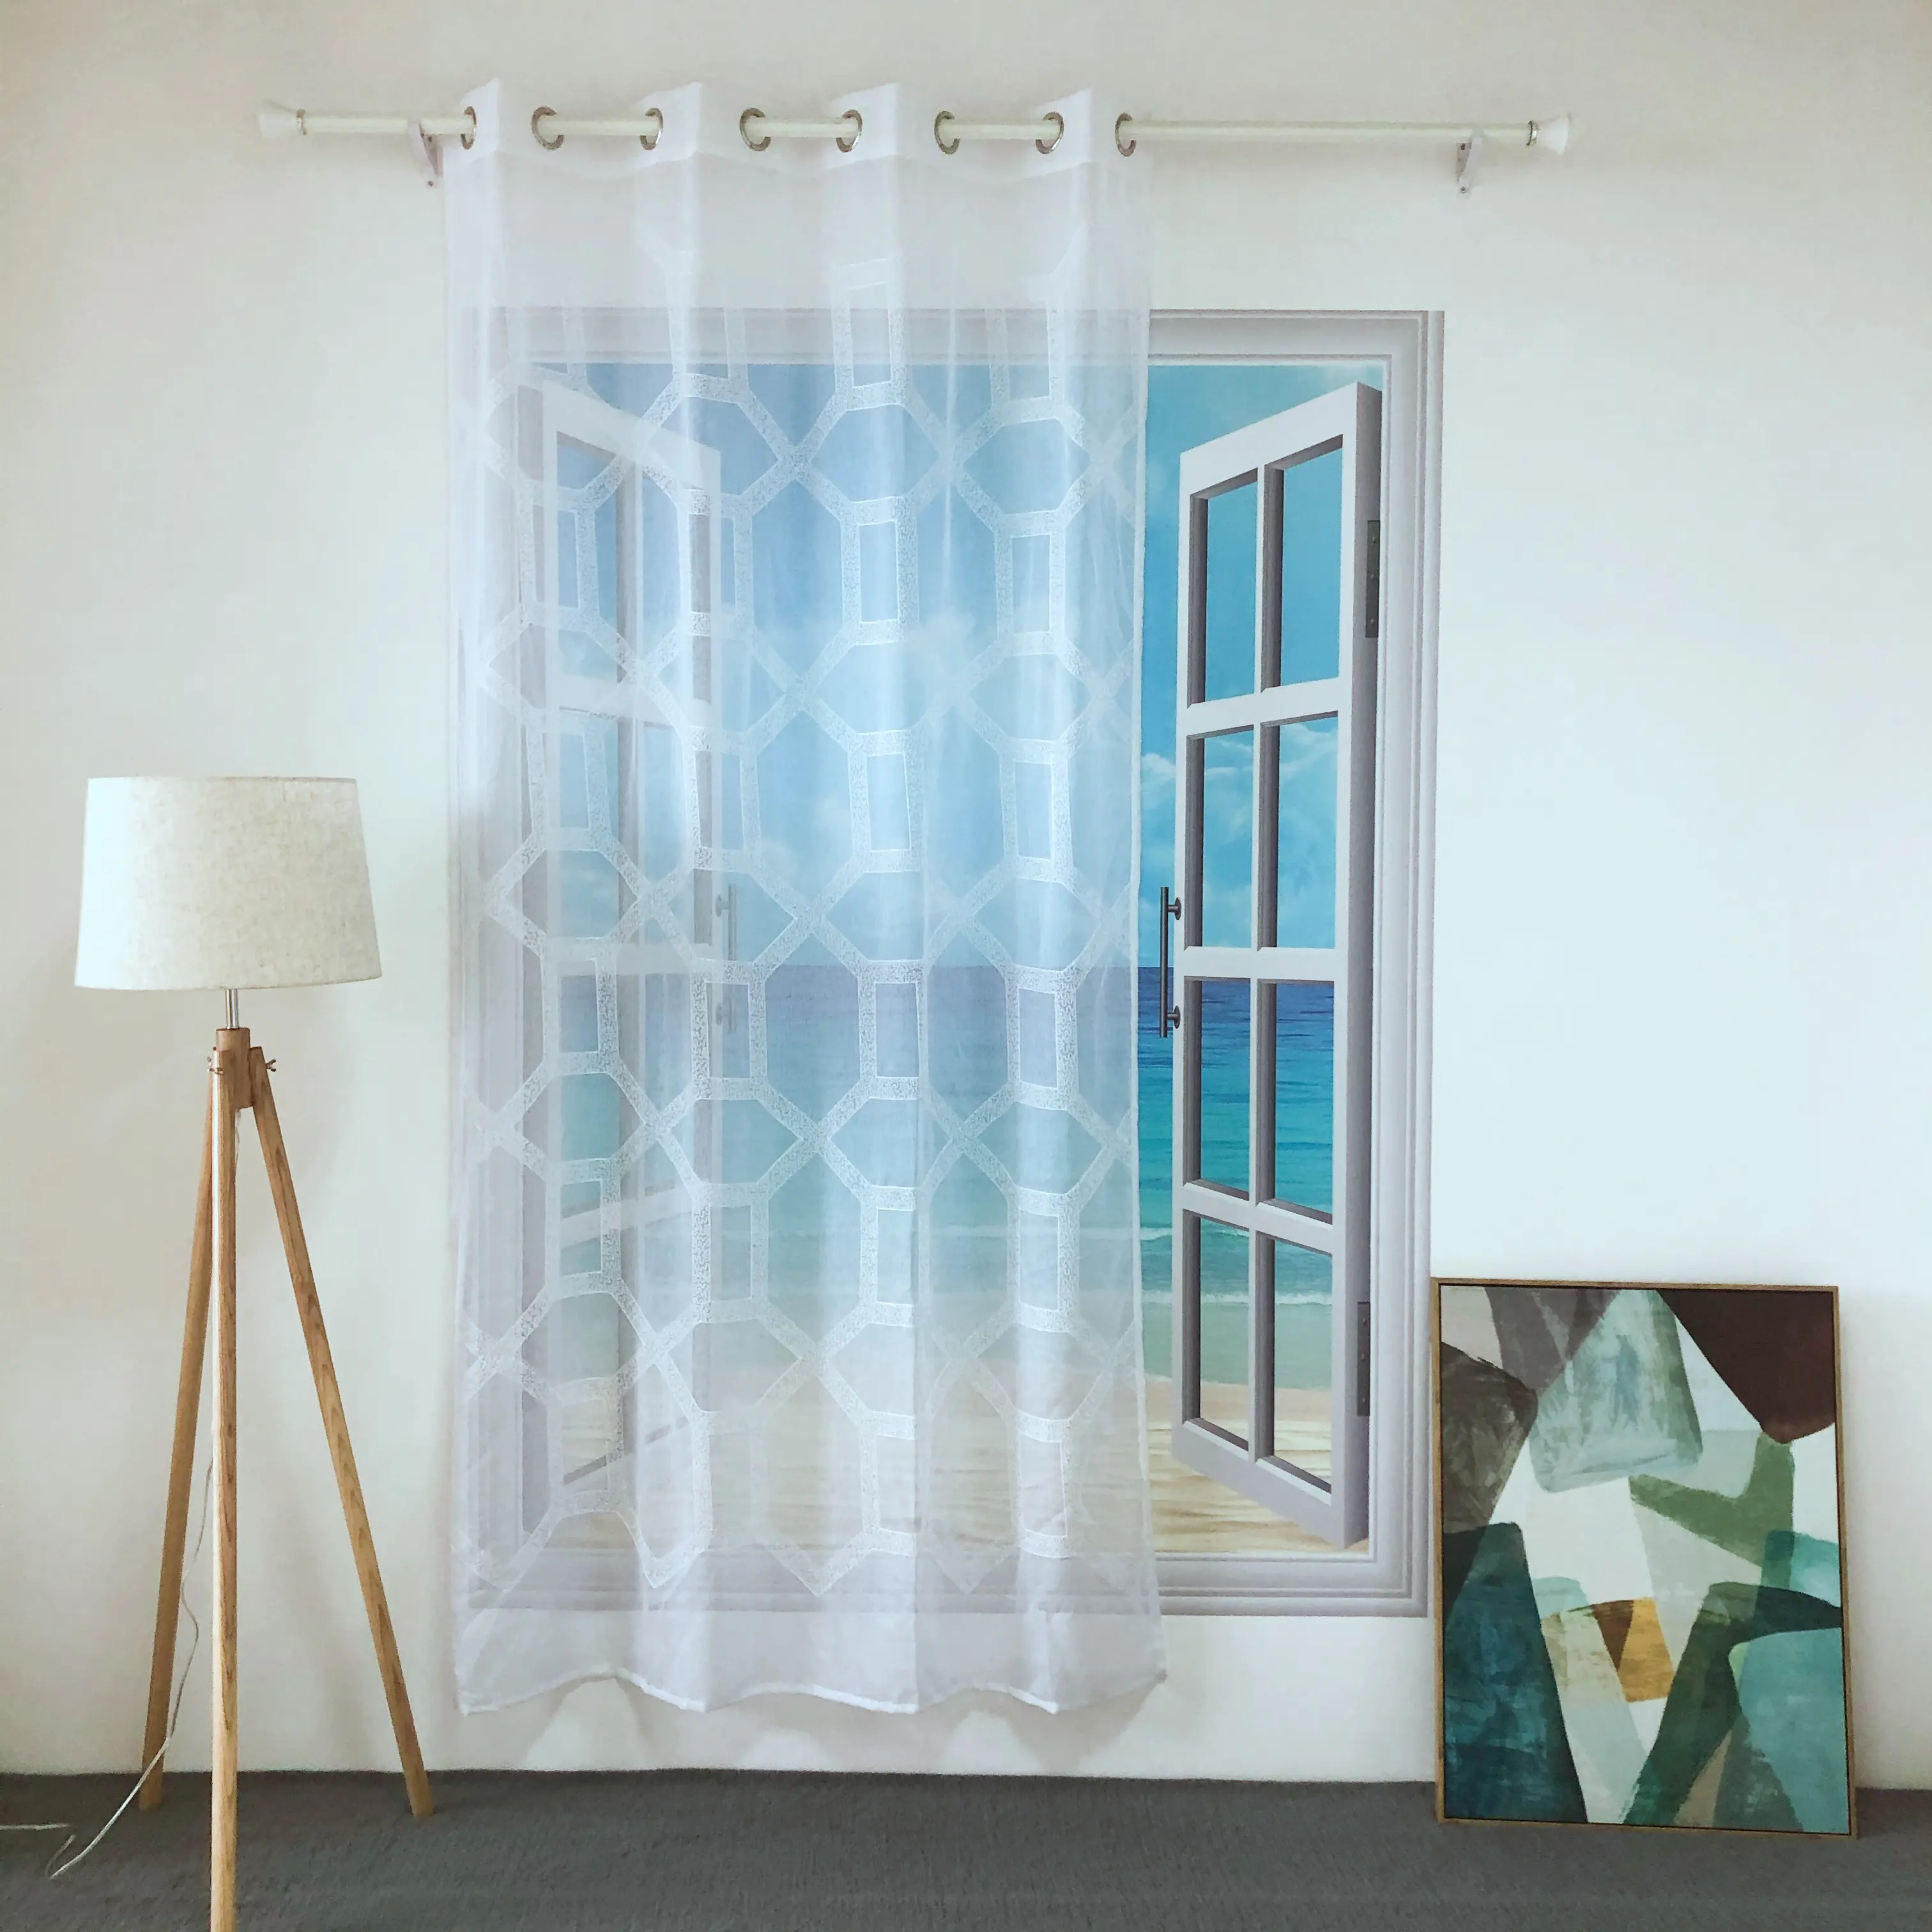 MODERN POLYESTER HOT SELLING WHITE DOLLY VOILE GEOMETRIC EMBROIDERY SHEER PANEL CURTAIN FOR LIVING ROOM AND HOTEL EMD-29 TULLE